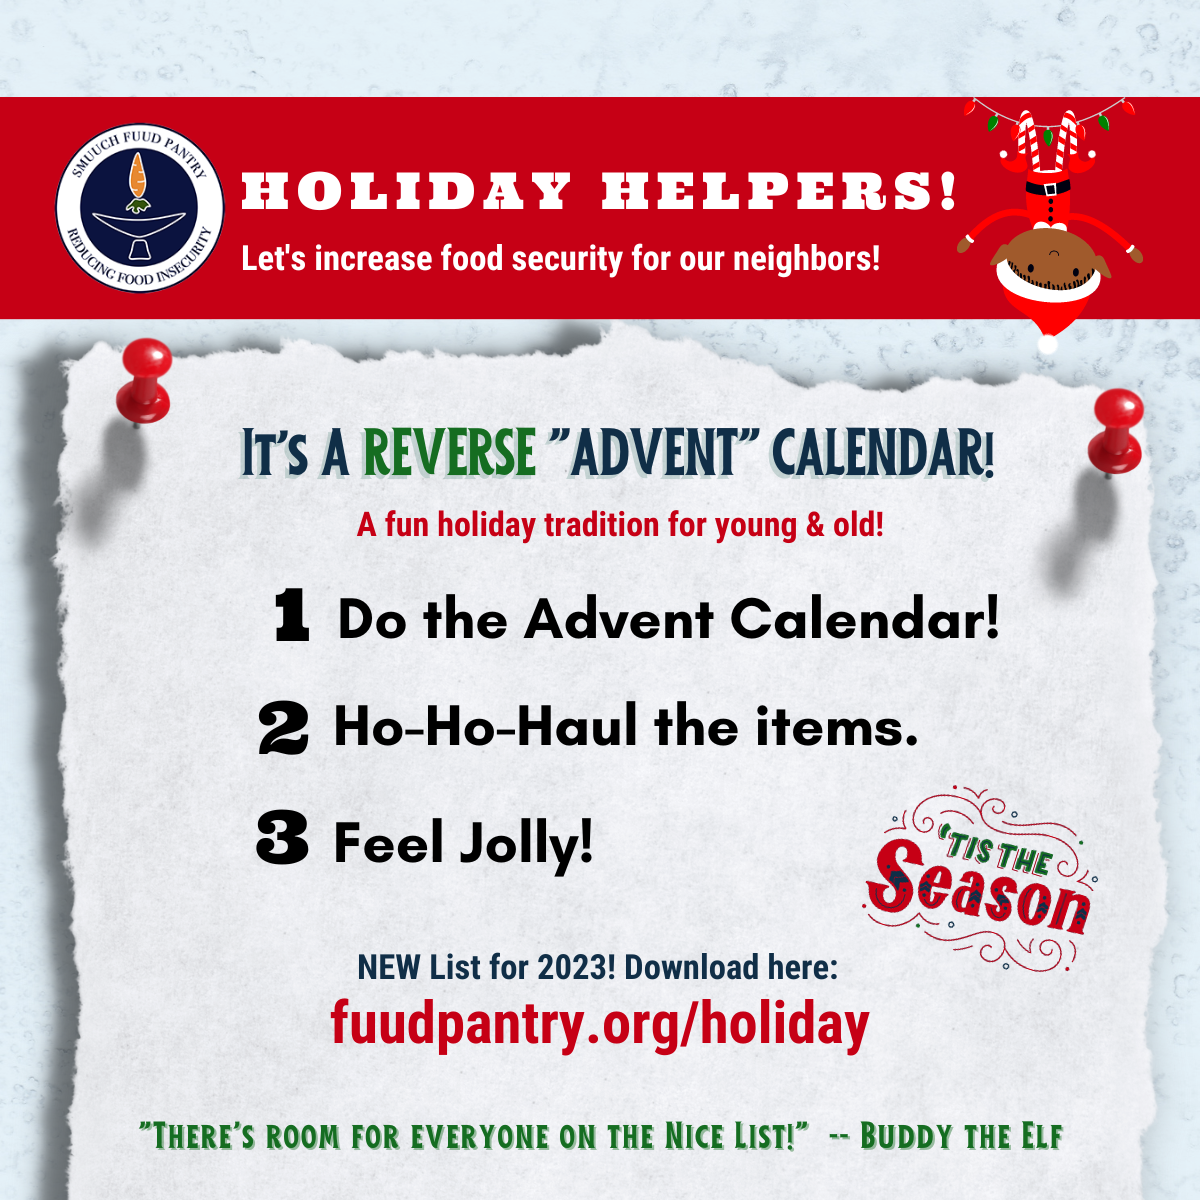 Use the Reverse Advent Calendar to Shop for the Food Pantry this holiday Season!